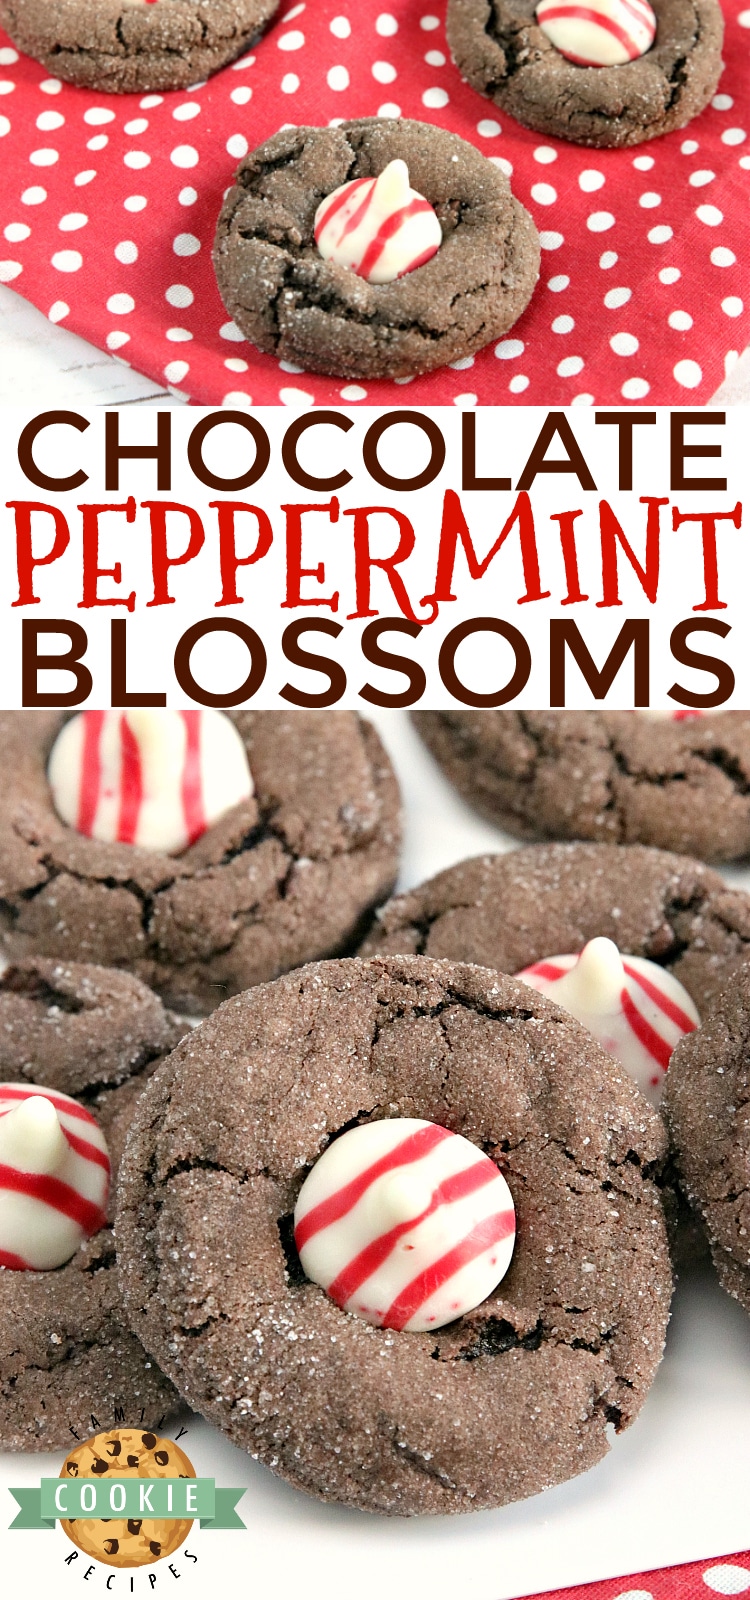 Chocolate Peppermint Blossoms are made with a cake mix, eggs, butter, and Hershey's Candy Cane Kisses. This easy cake mix cookie recipe yields soft and chewy chocolate cookies with just the right amount of peppermint!